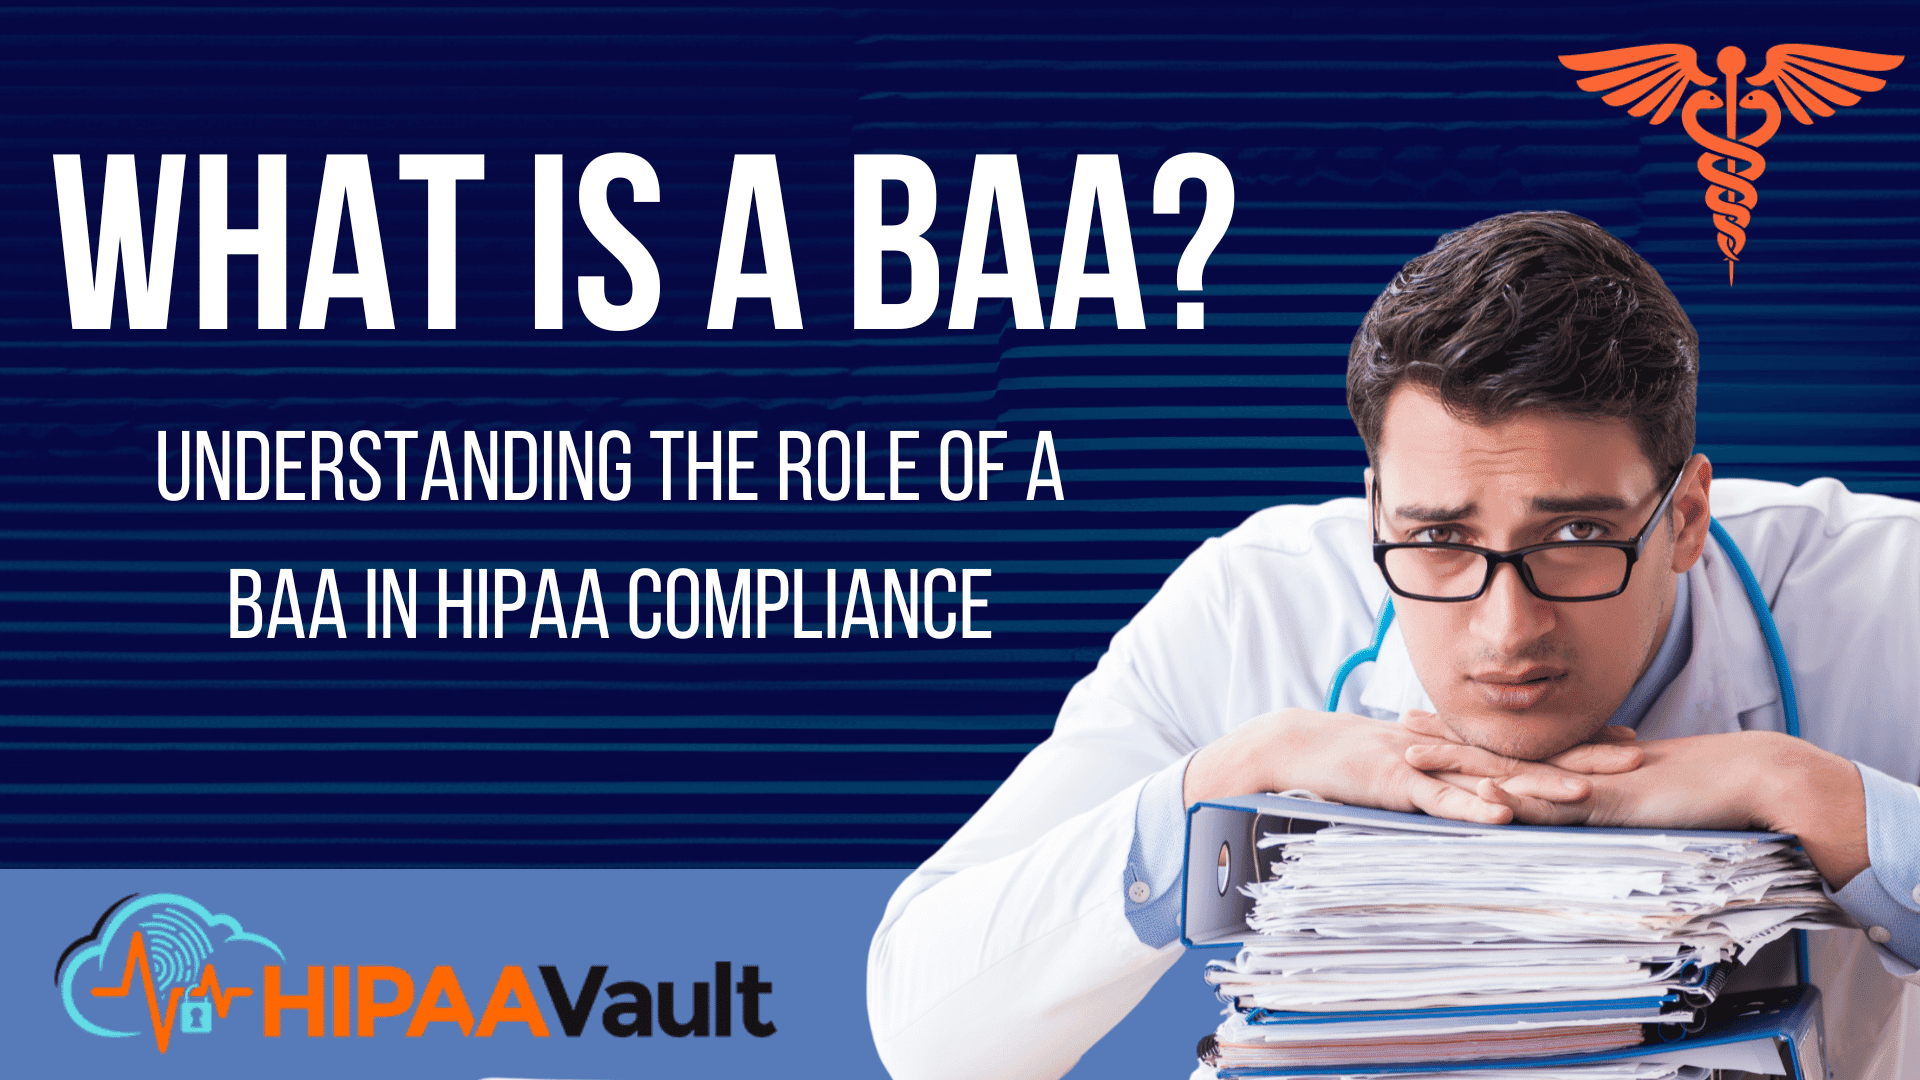 What Is a BAA? Understanding the Role of a BAA in HIPAA Compliance